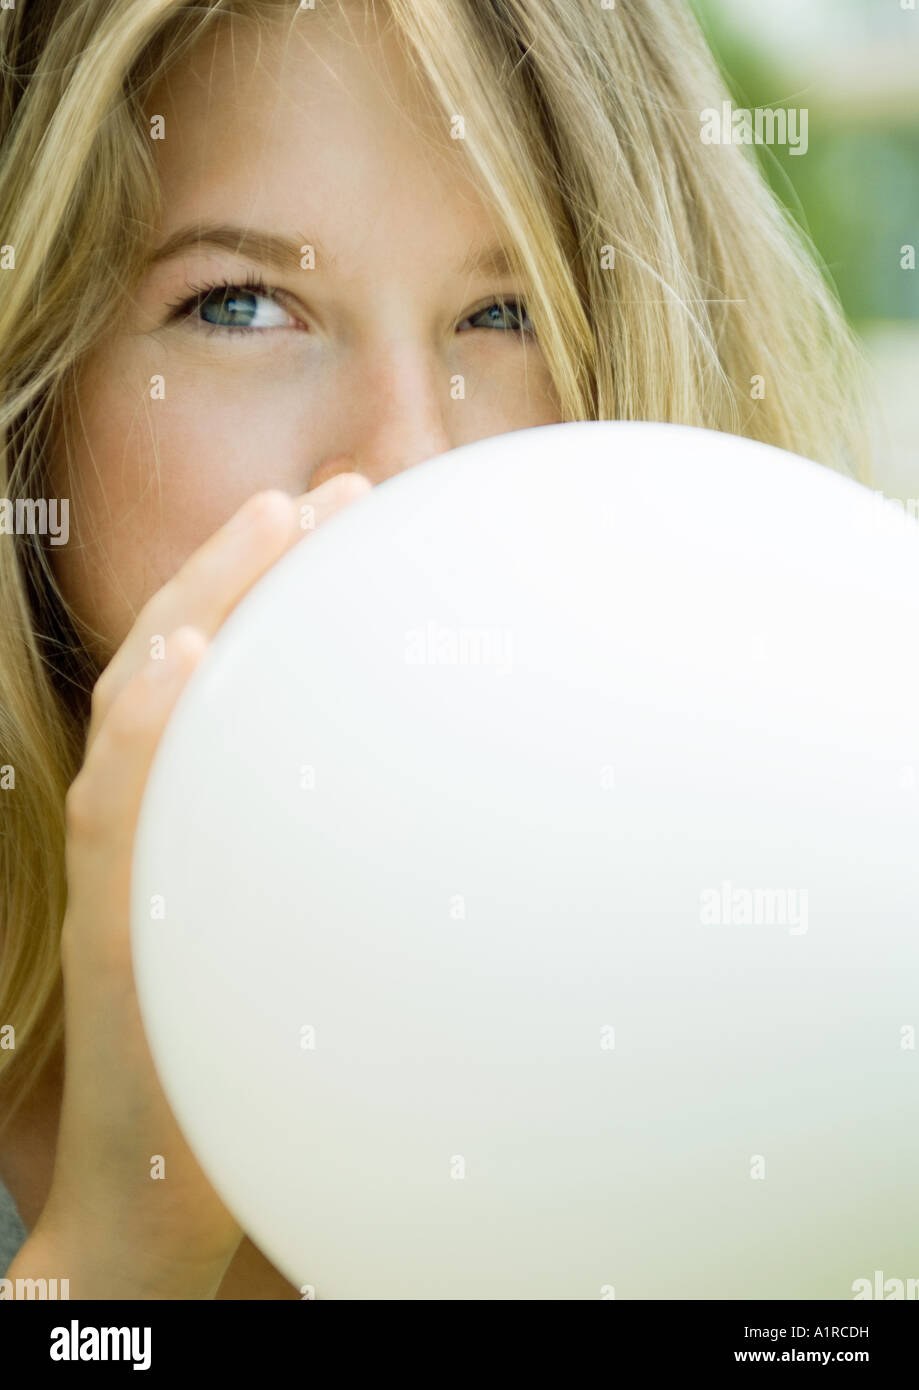 Young woman blowing up balloon Stock Photo